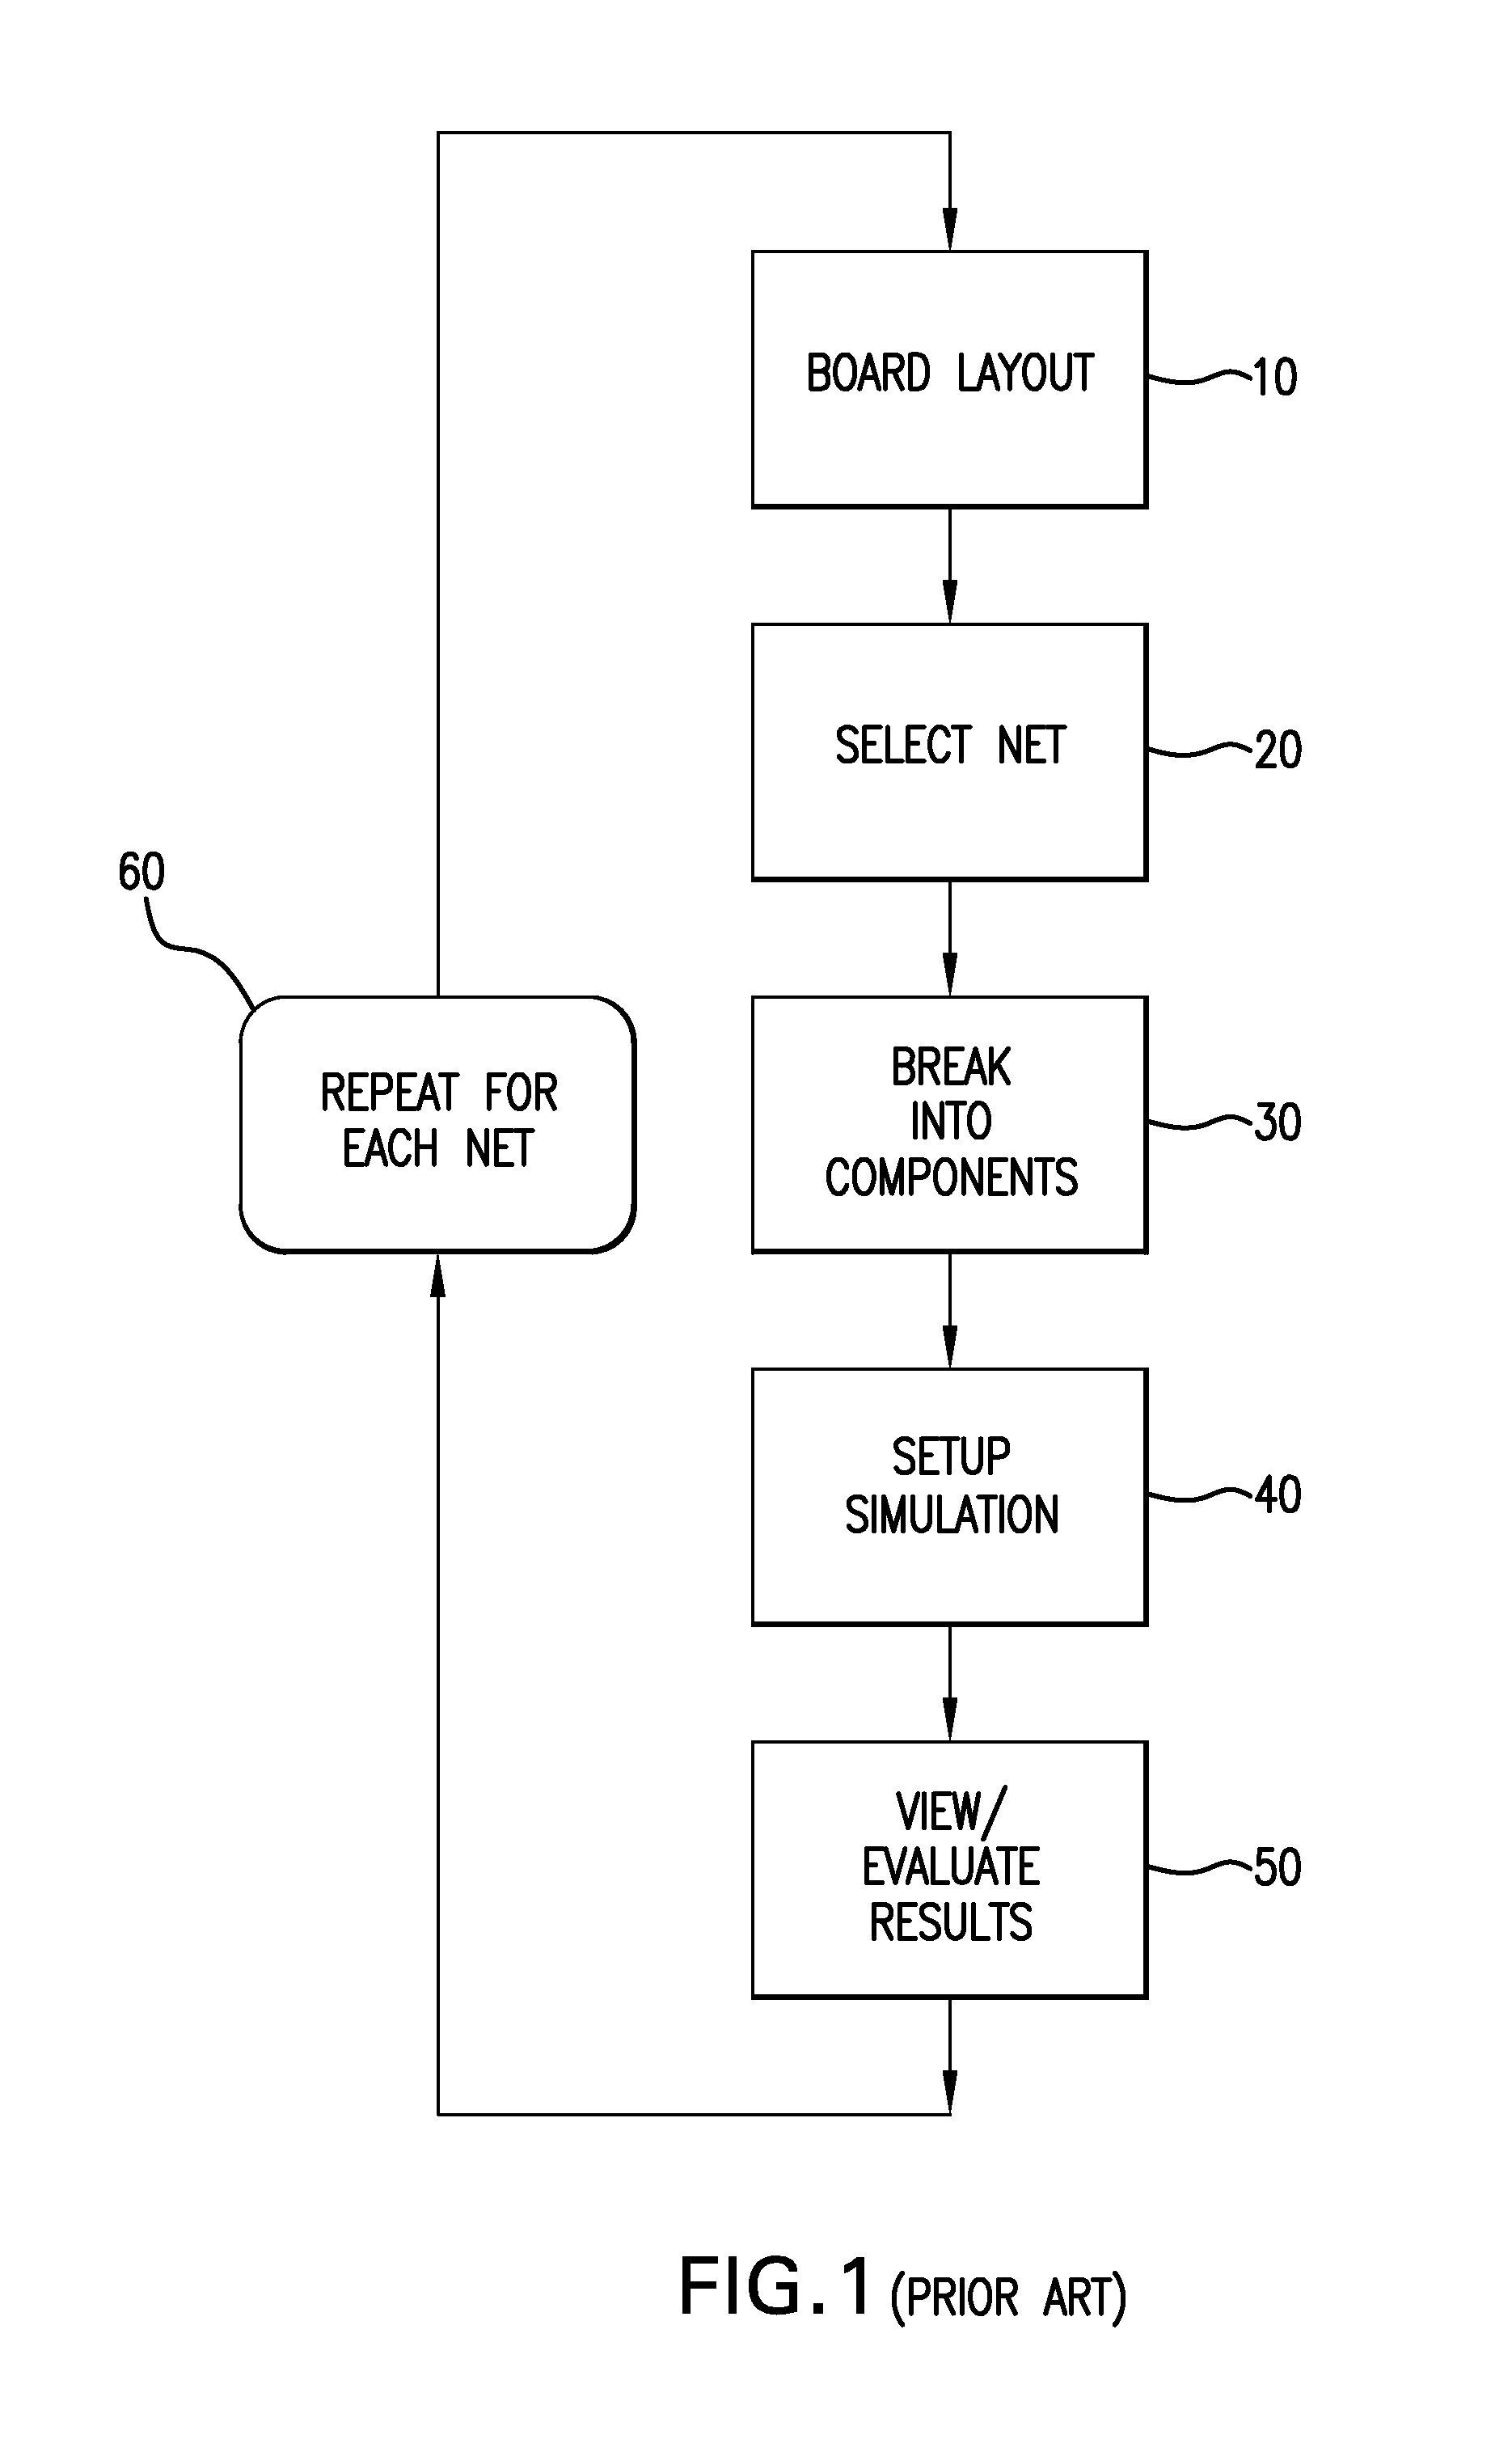 Method and system for screening nets in a post-layout environment